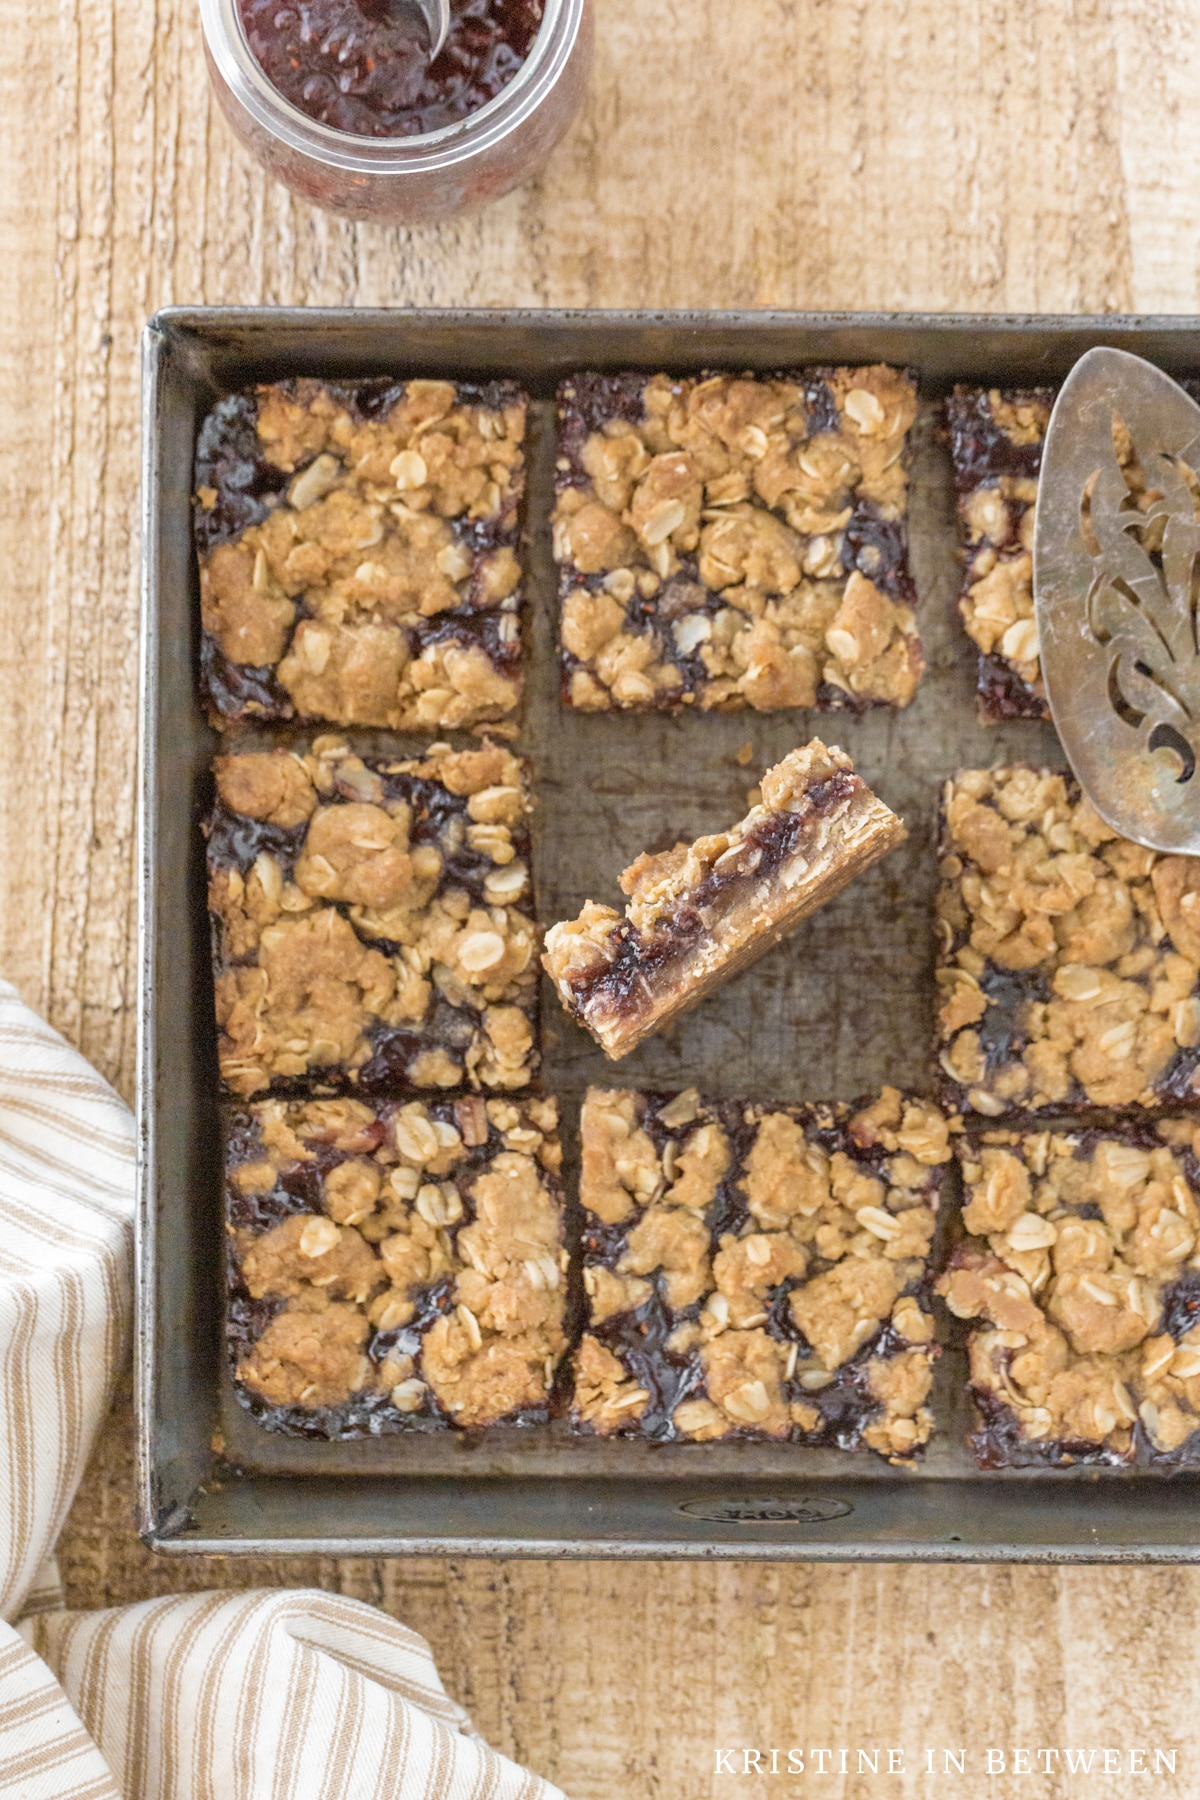 Jam bars in an antique baking pan with one bar on its side to show the inside.